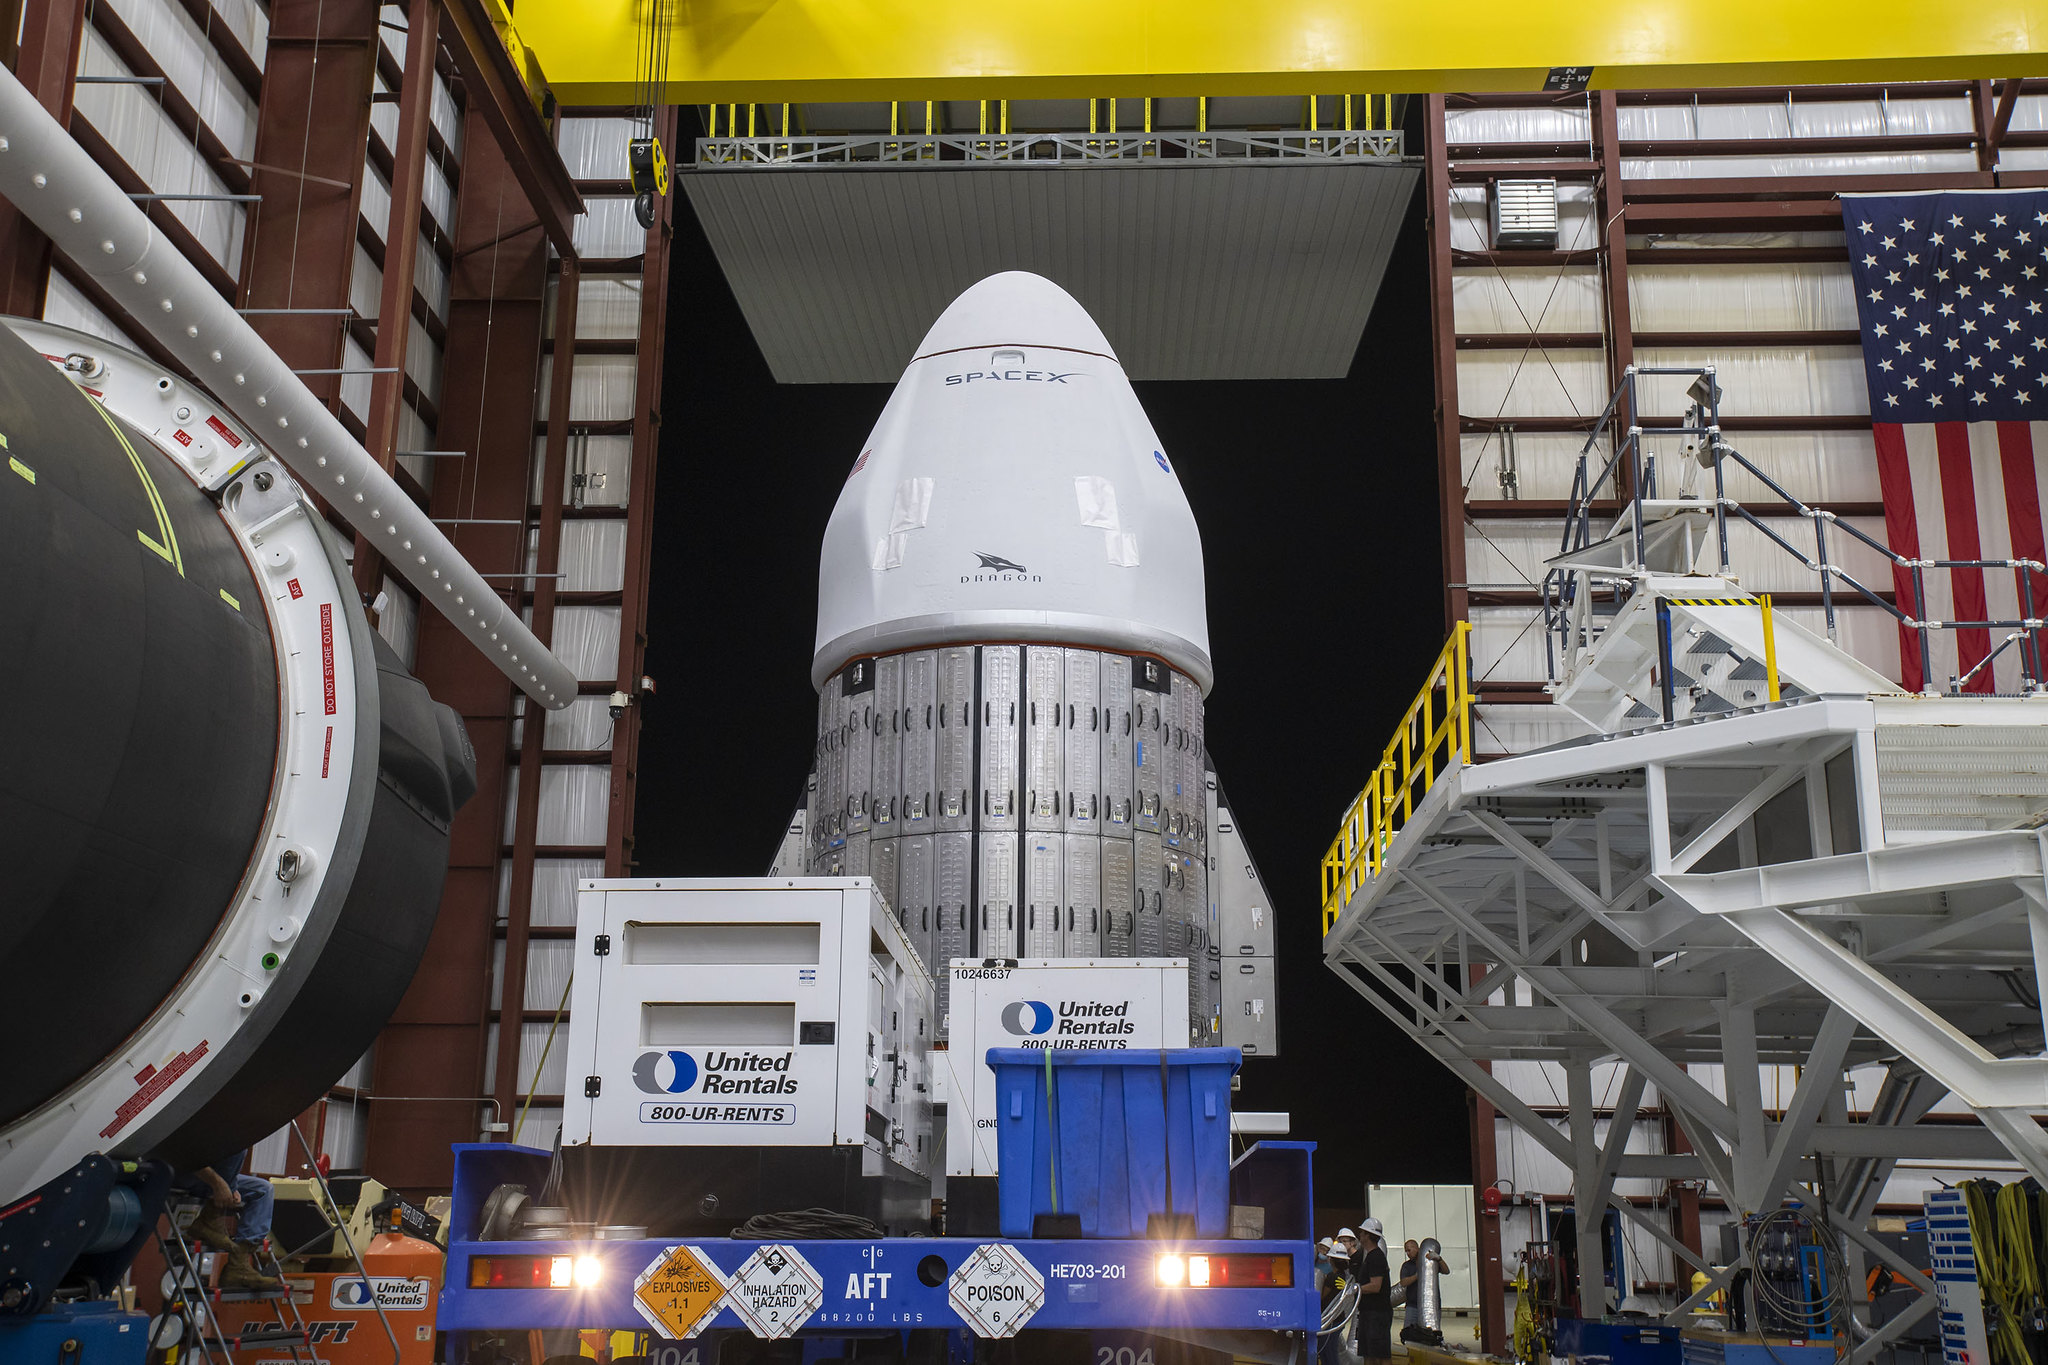 The SpaceX Dragon spacecraft resting in the hangar at NASA’s Kennedy Space Center’s Launch Complex.